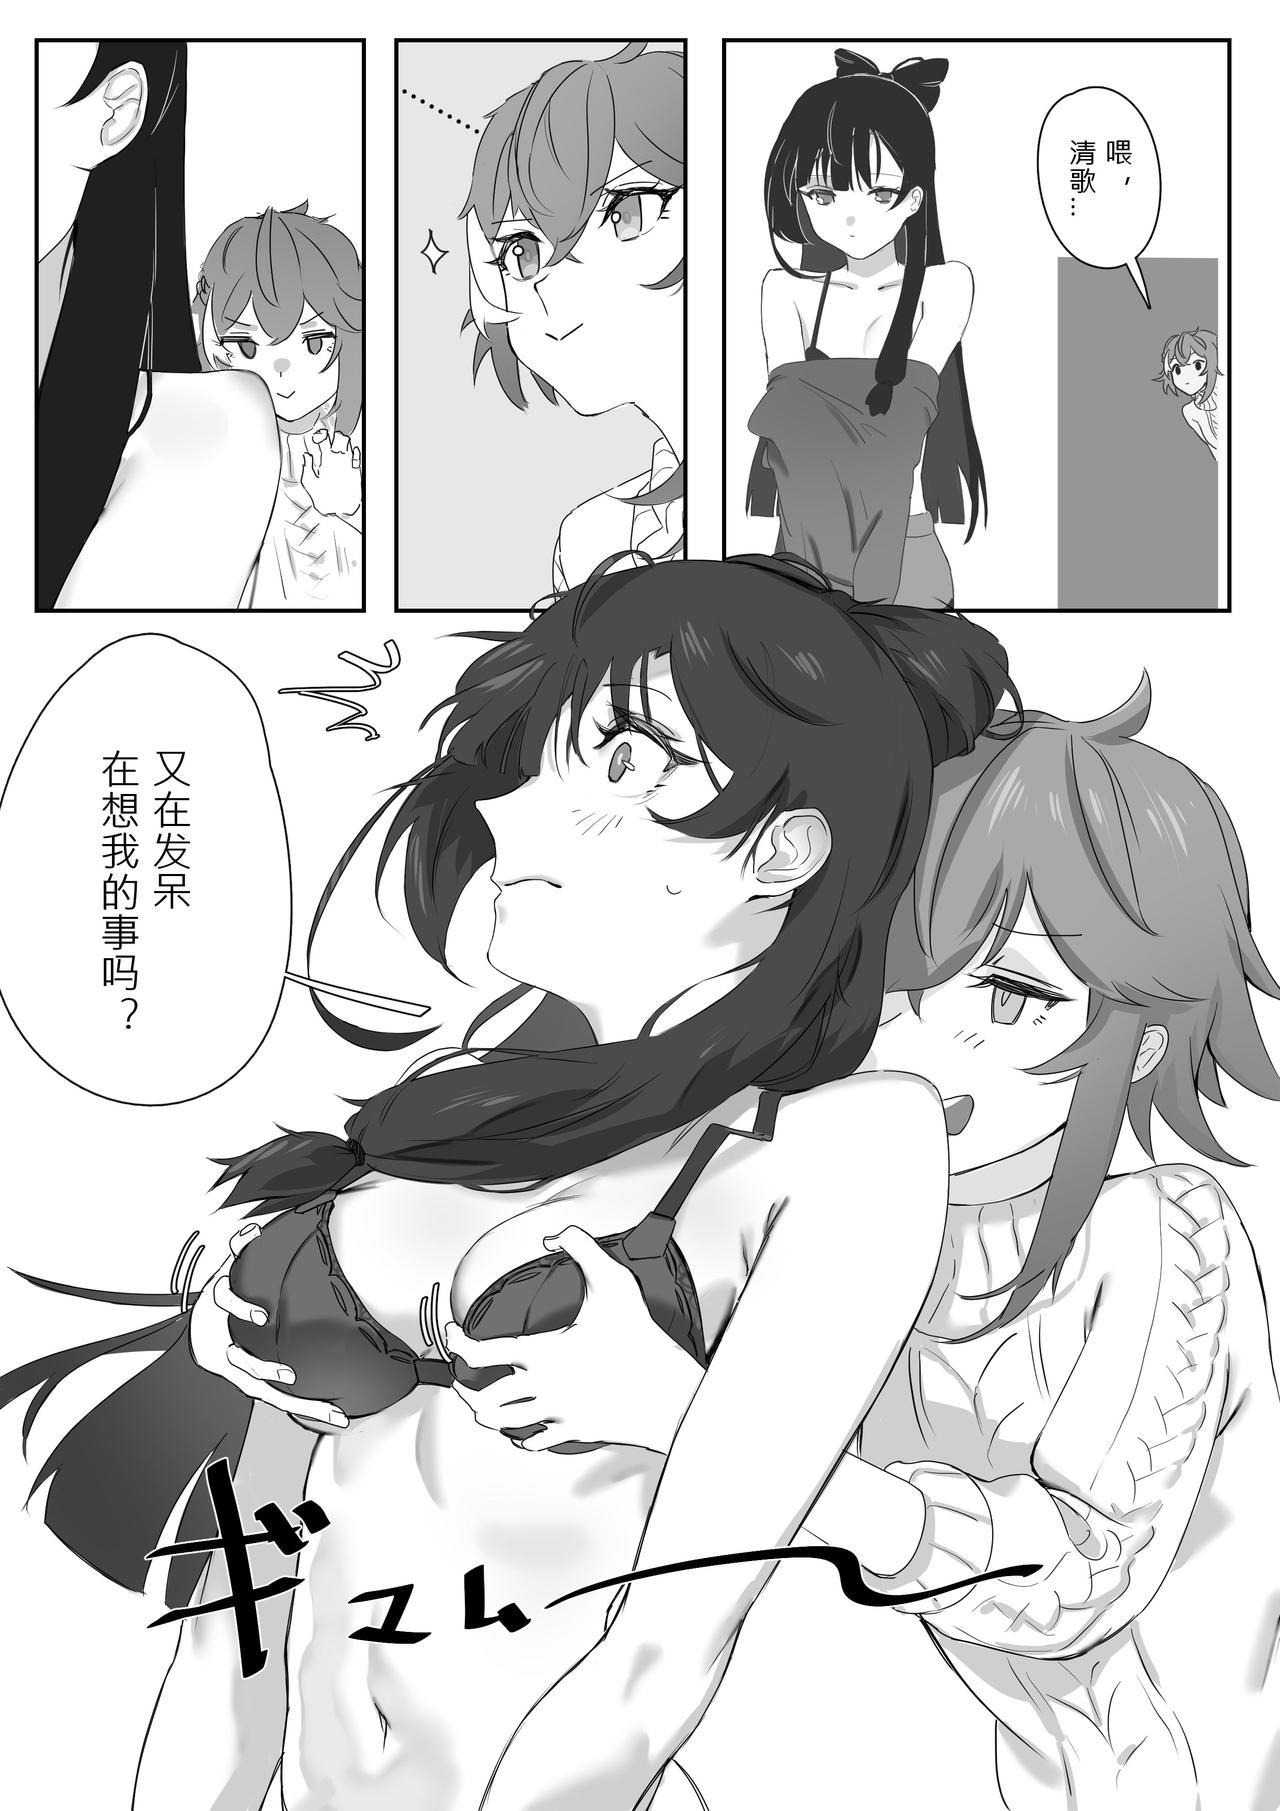 Sexteen 百合吧歌姬！ Sesso - Page 1